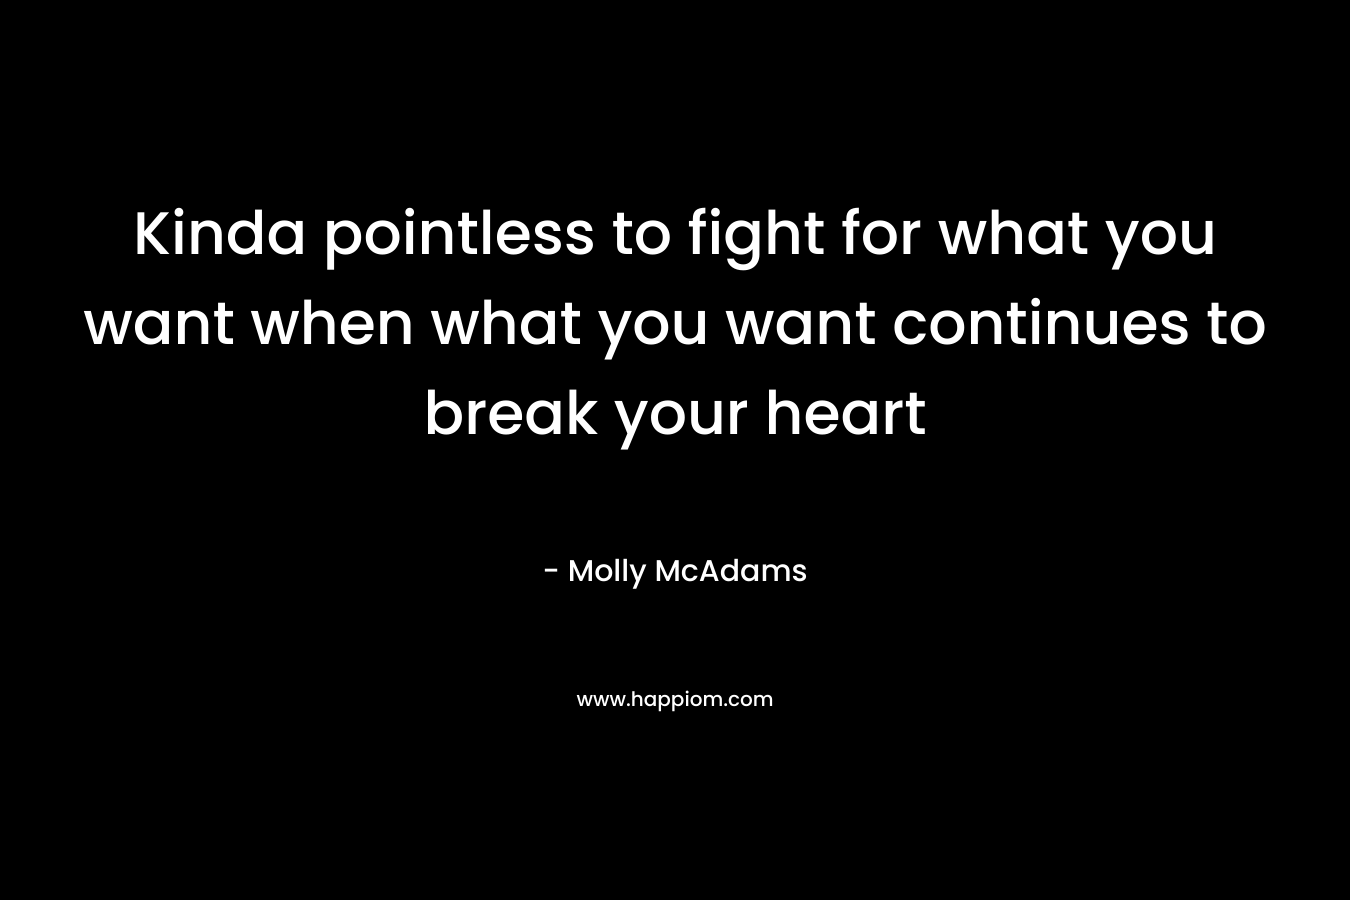 Kinda pointless to fight for what you want when what you want continues to break your heart